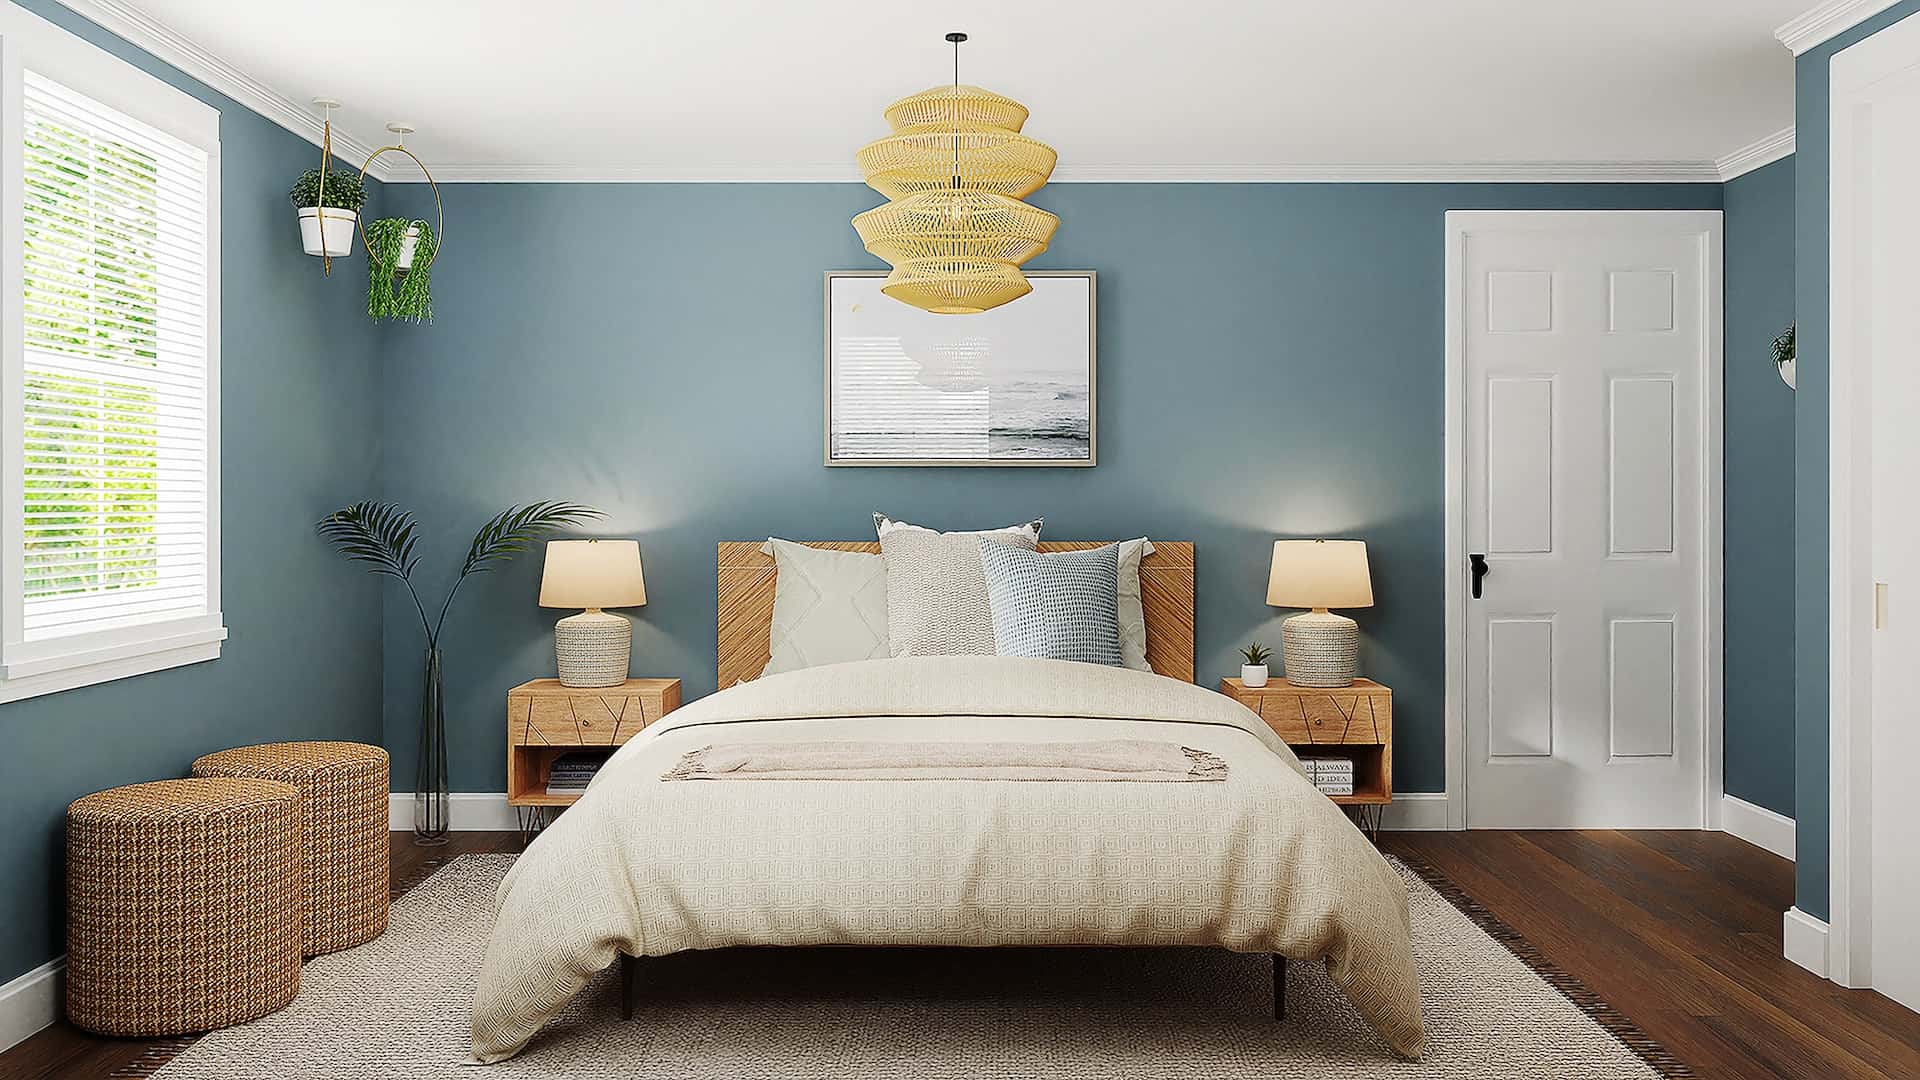 Intense wall colors in the bedroom – is it a good idea?